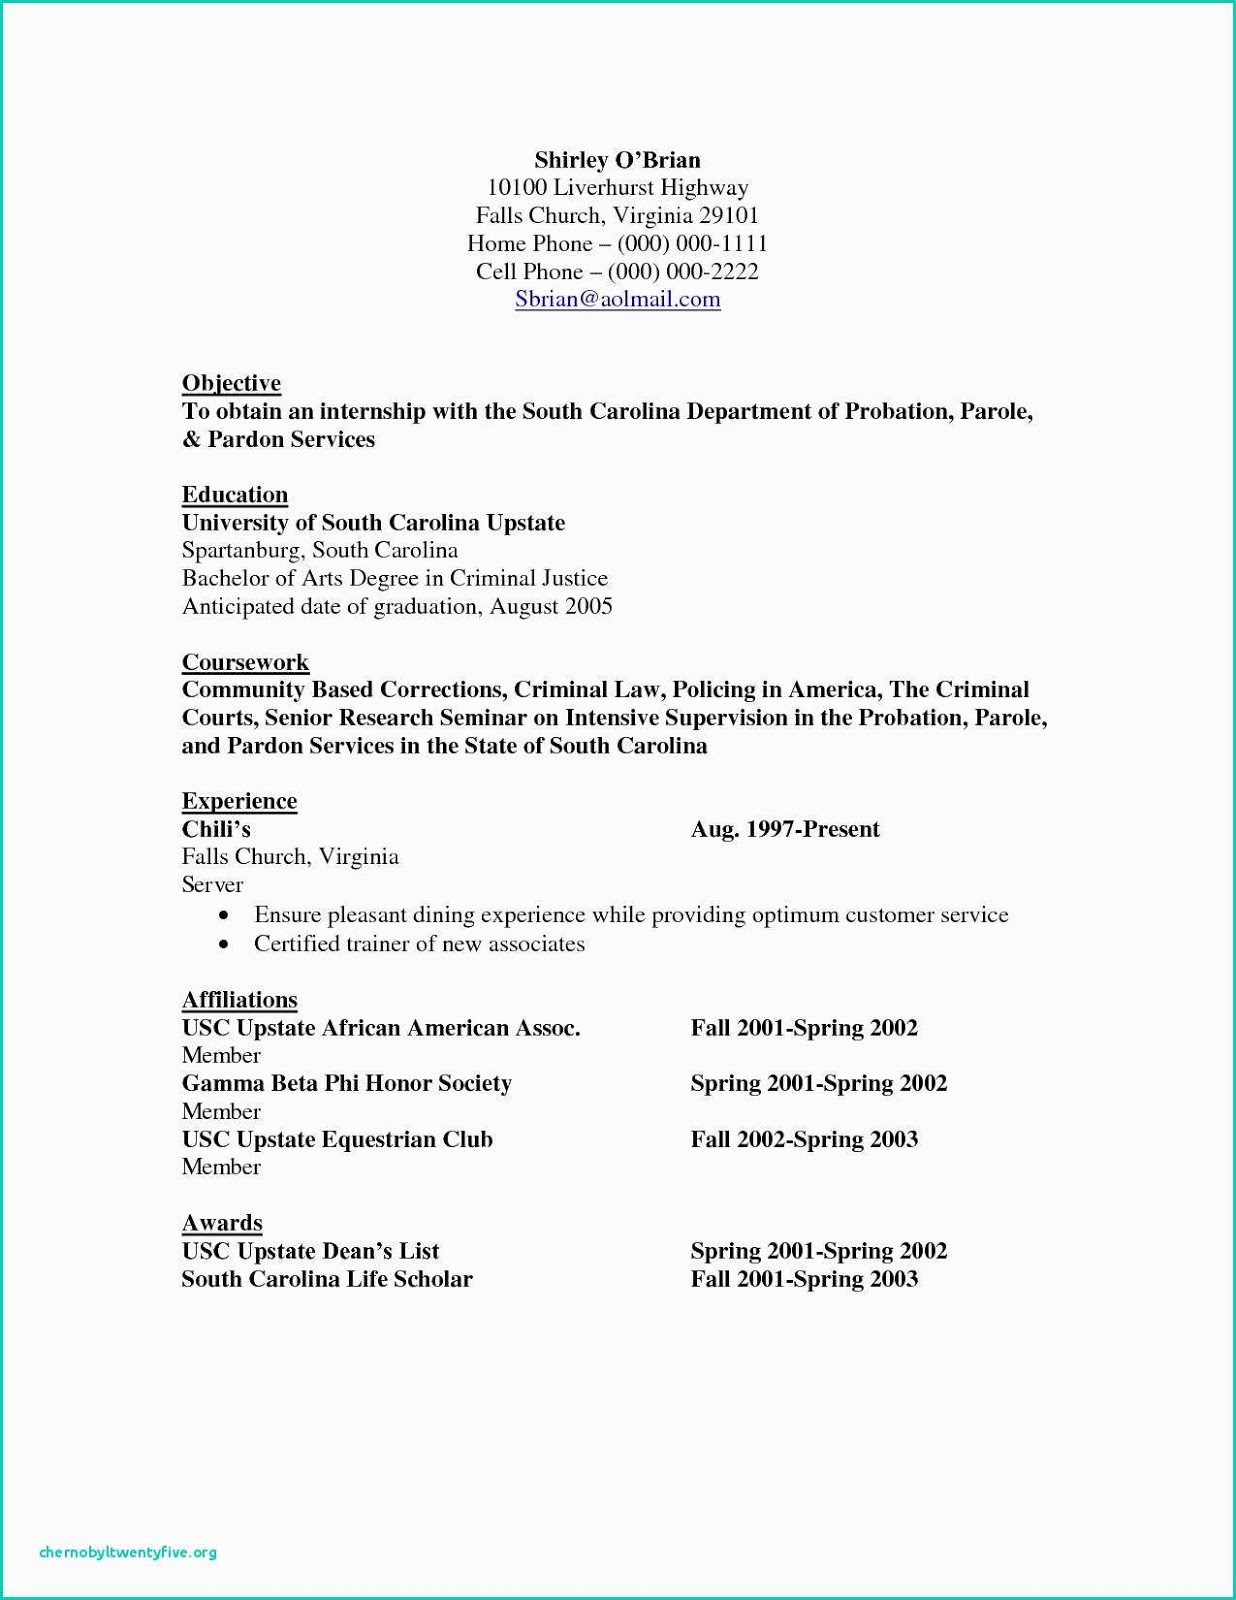 food service resume objective examples, food service supervisor resume objective examples 2019 , resume objective examples for food service , general resume objective examples food service,